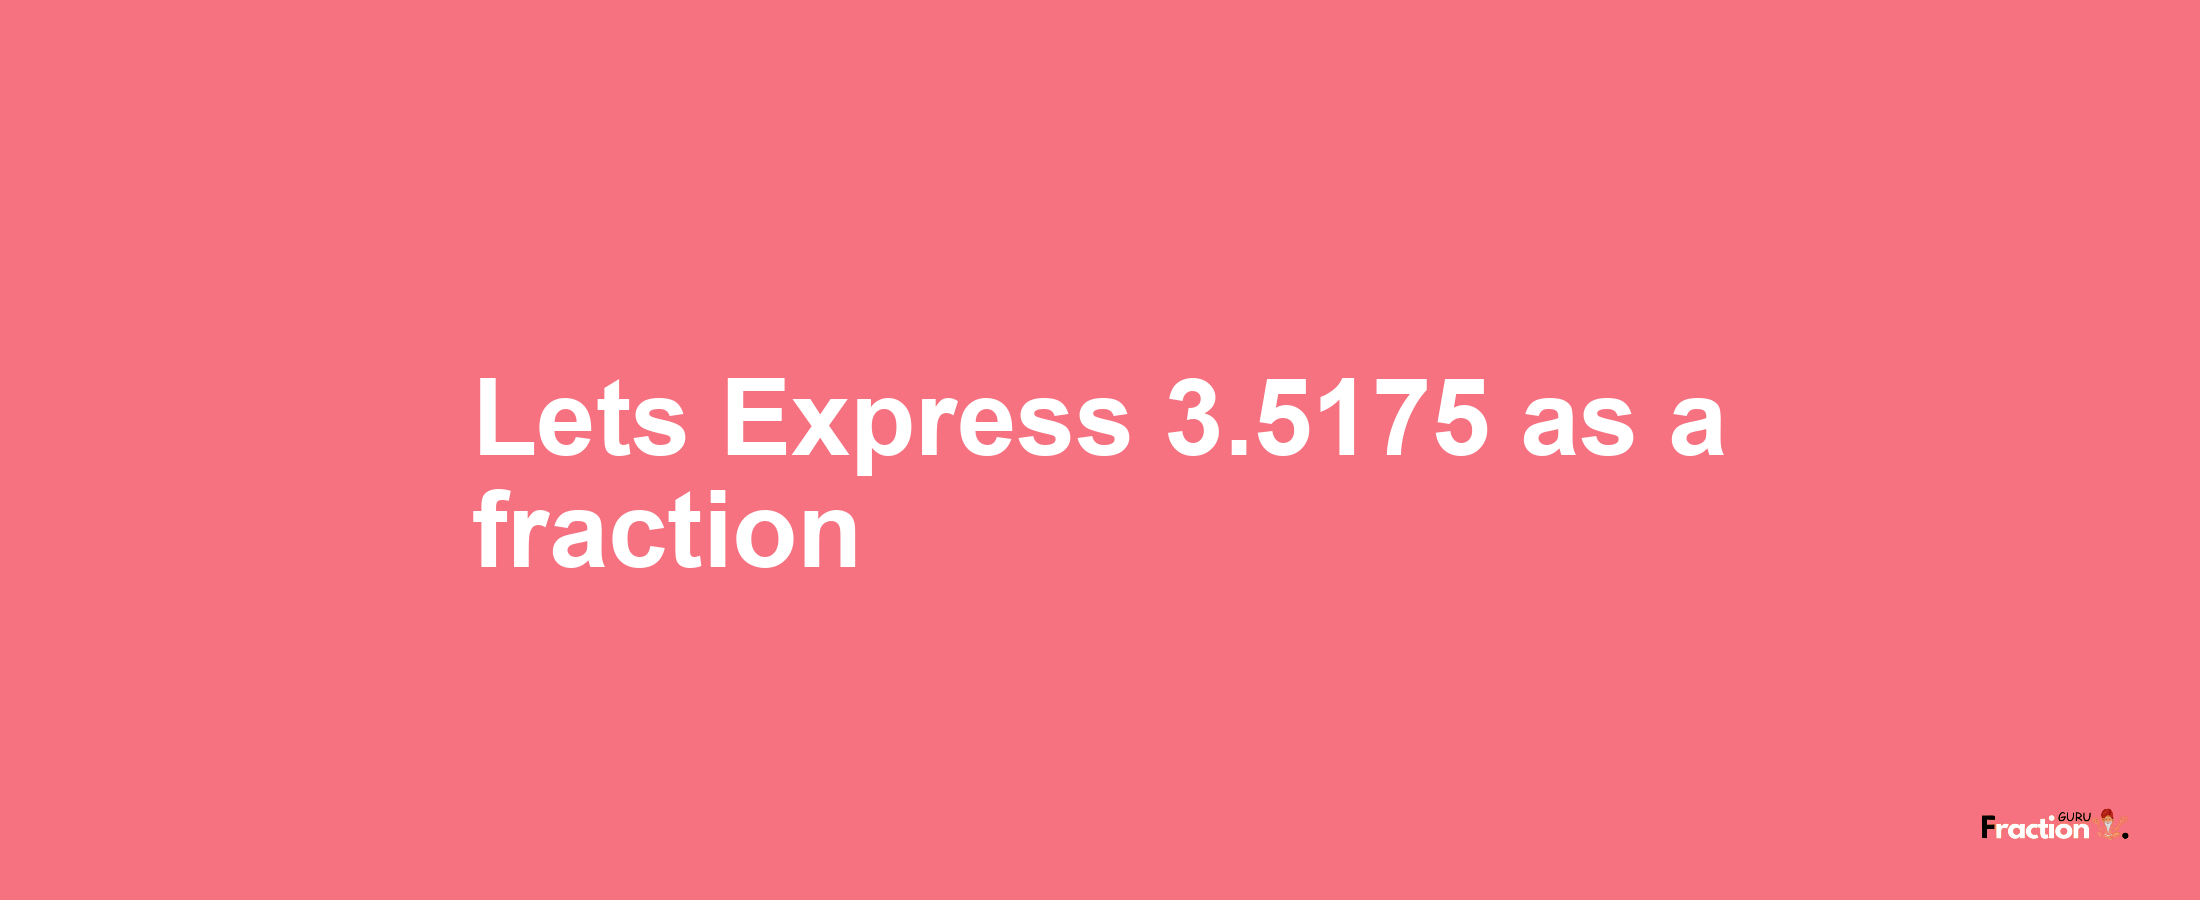 Lets Express 3.5175 as afraction